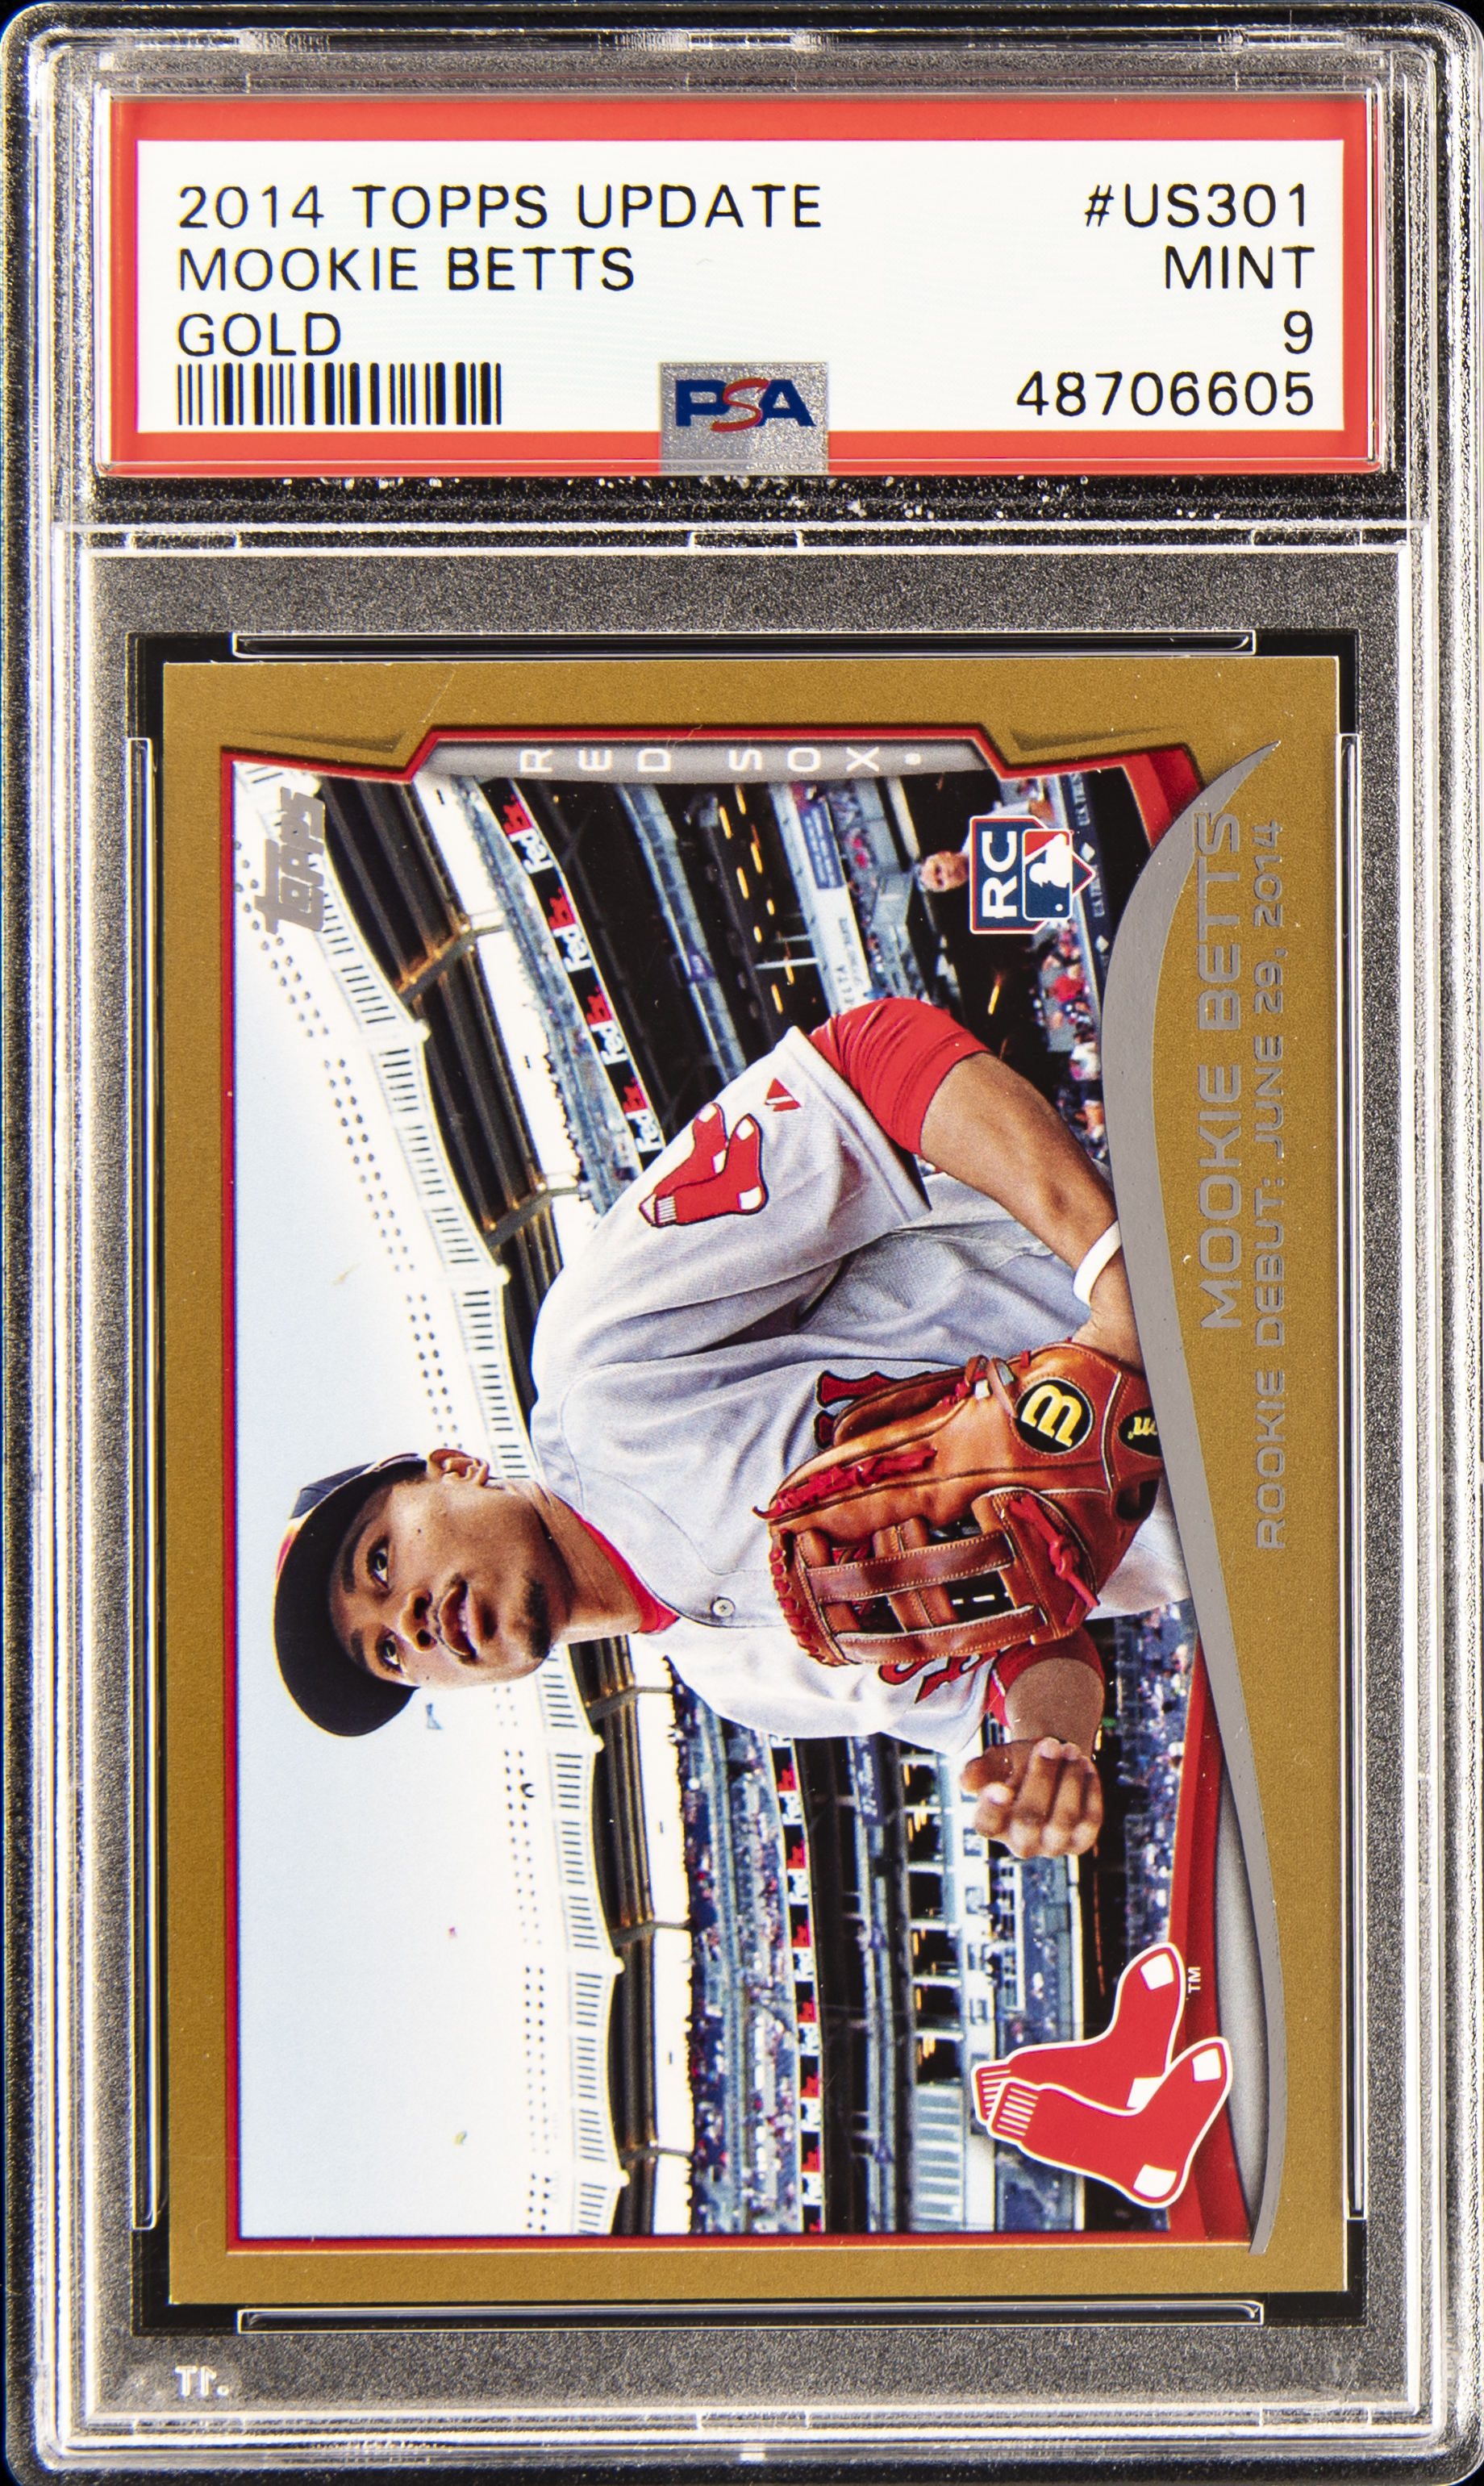 2014 Topps Update Gold Us301 Mookie Betts Rookie Card – PSA MINT 9